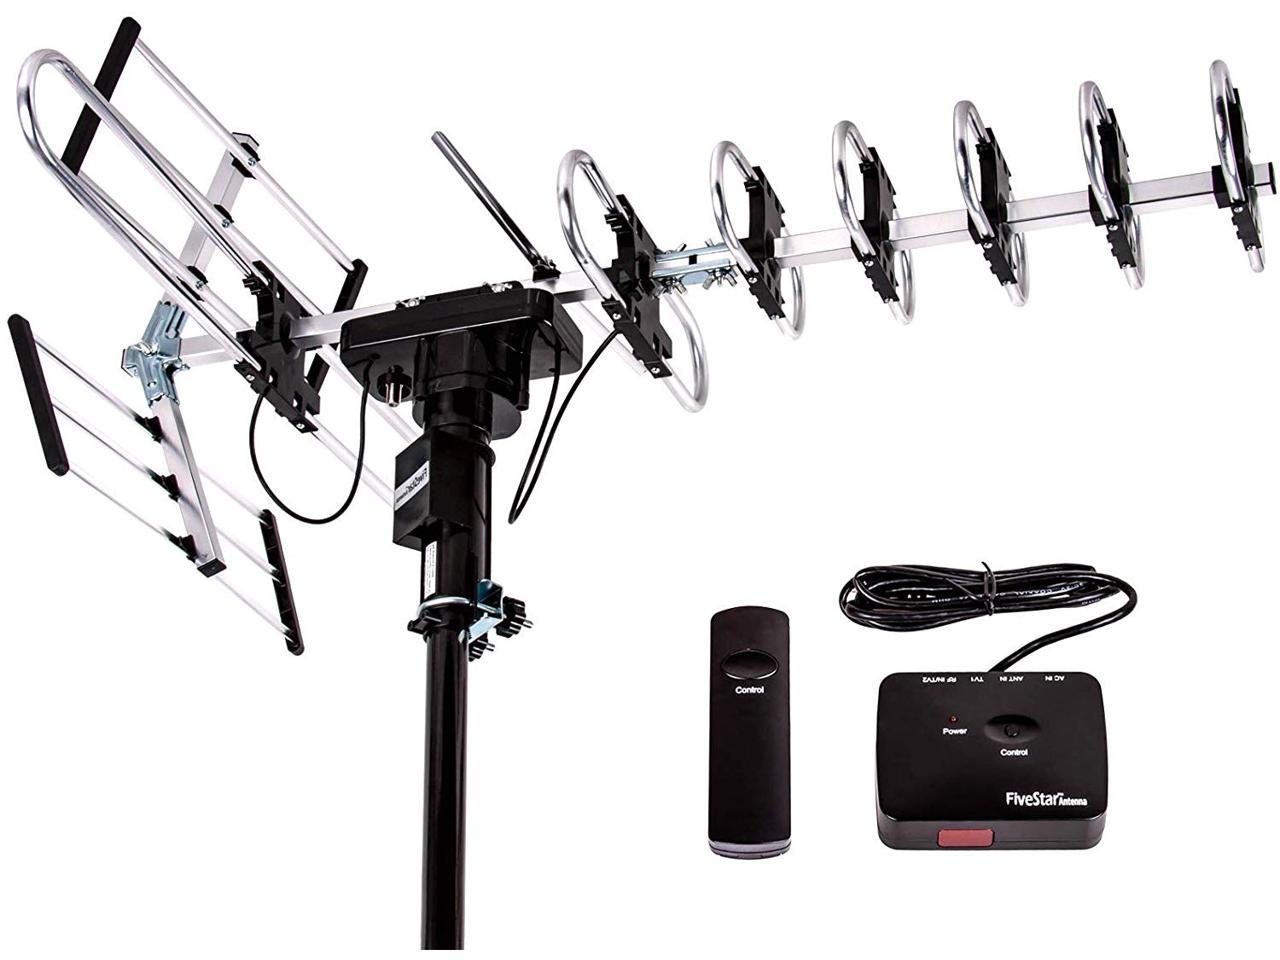 40 Feet RG6 Cable/Mounting Pole/2-Way Splitter Included McDuory Outdoor Amplified Digital Antenna 150 Mile HDTV Antenna 360 Degree Rotation with Infrared Control High Performance in UHF/VHF 